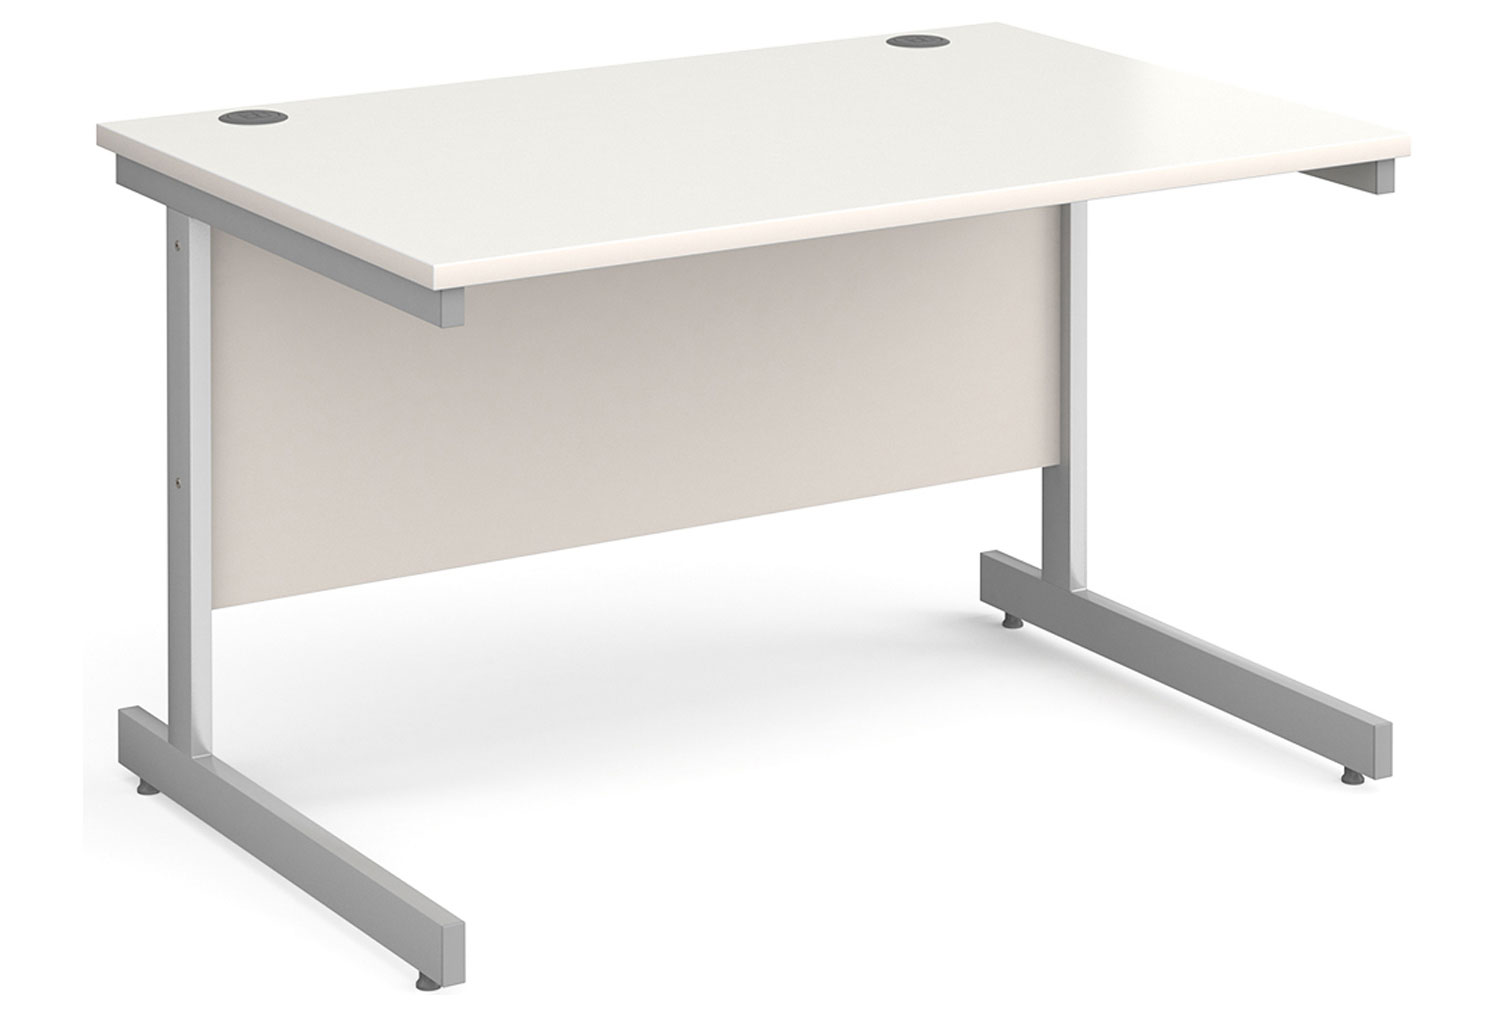 Thrifty Next-Day Rectangular Office Desk White, 120wx80dx73h (cm), Express Delivery